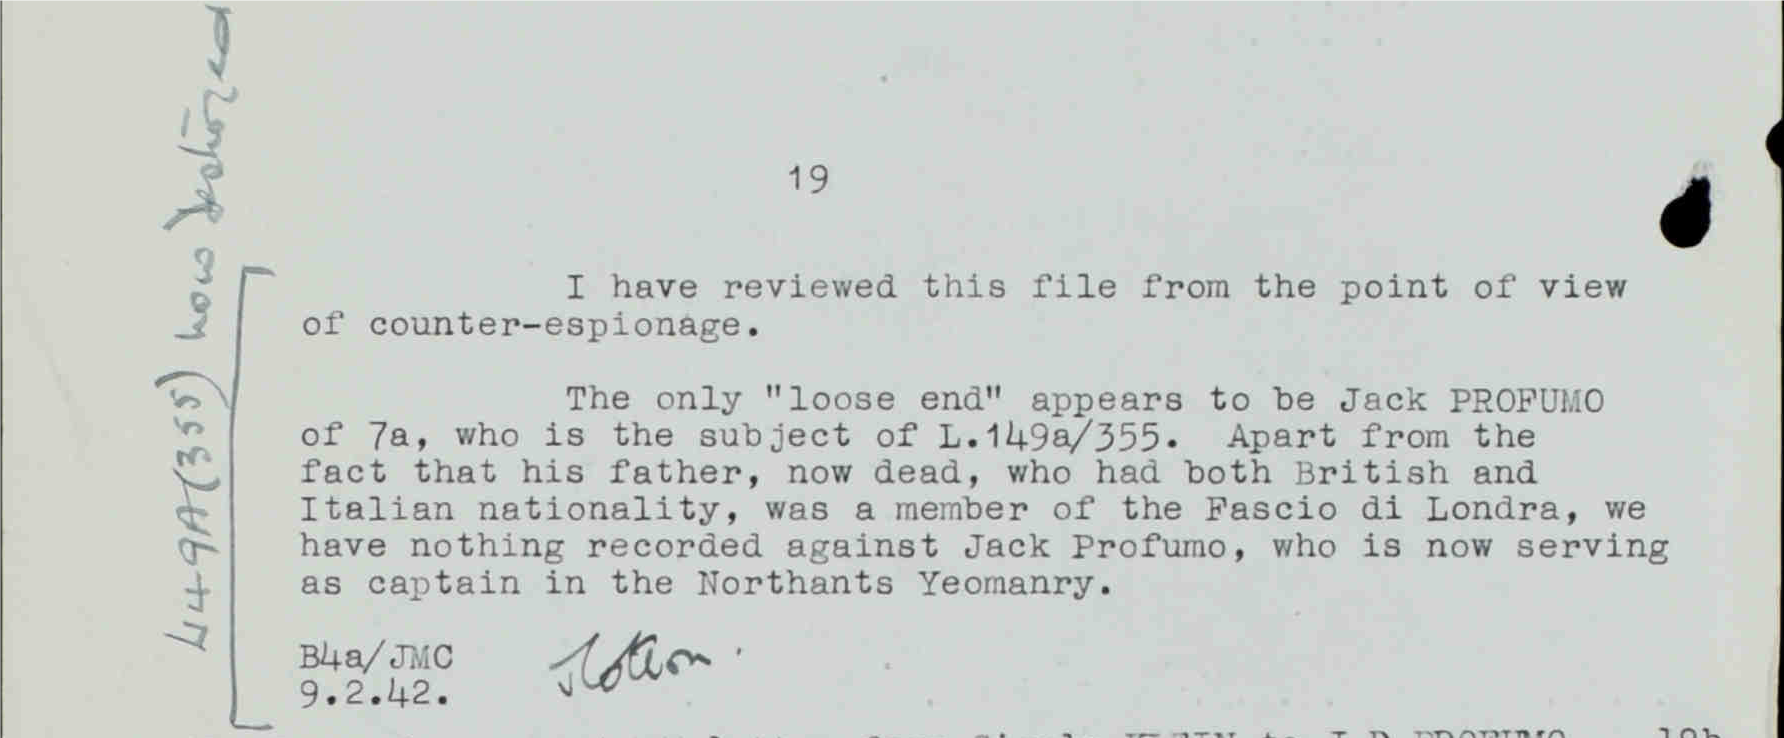 Mention of Profumo's father as a member of Italian Fascist Party